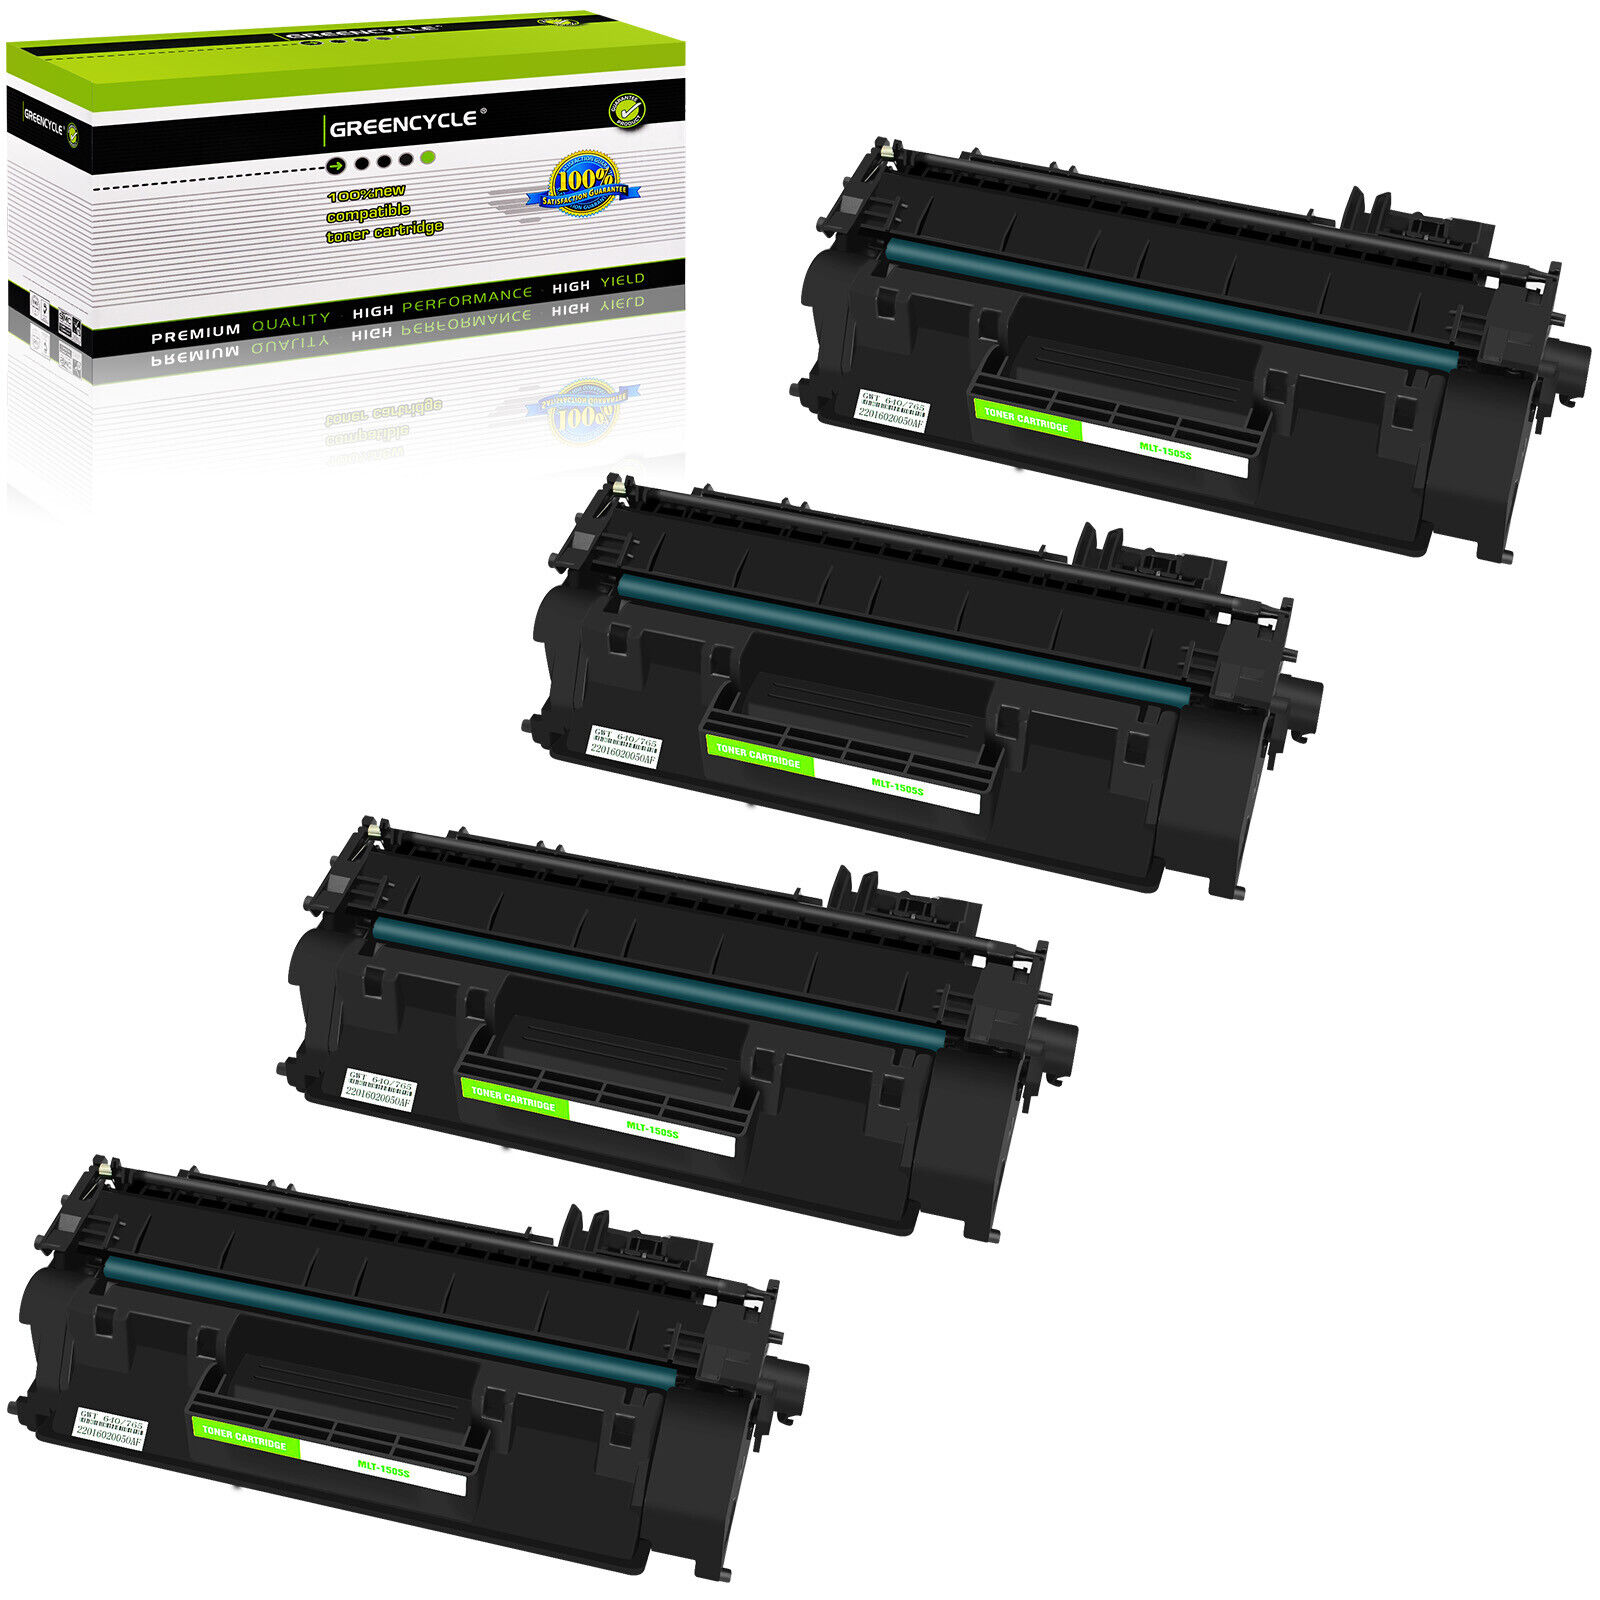 GREENCYCLE 4PK CF280A 80A Toner Cartridge Fits for HP LaserJet Pro 400 M401dn US